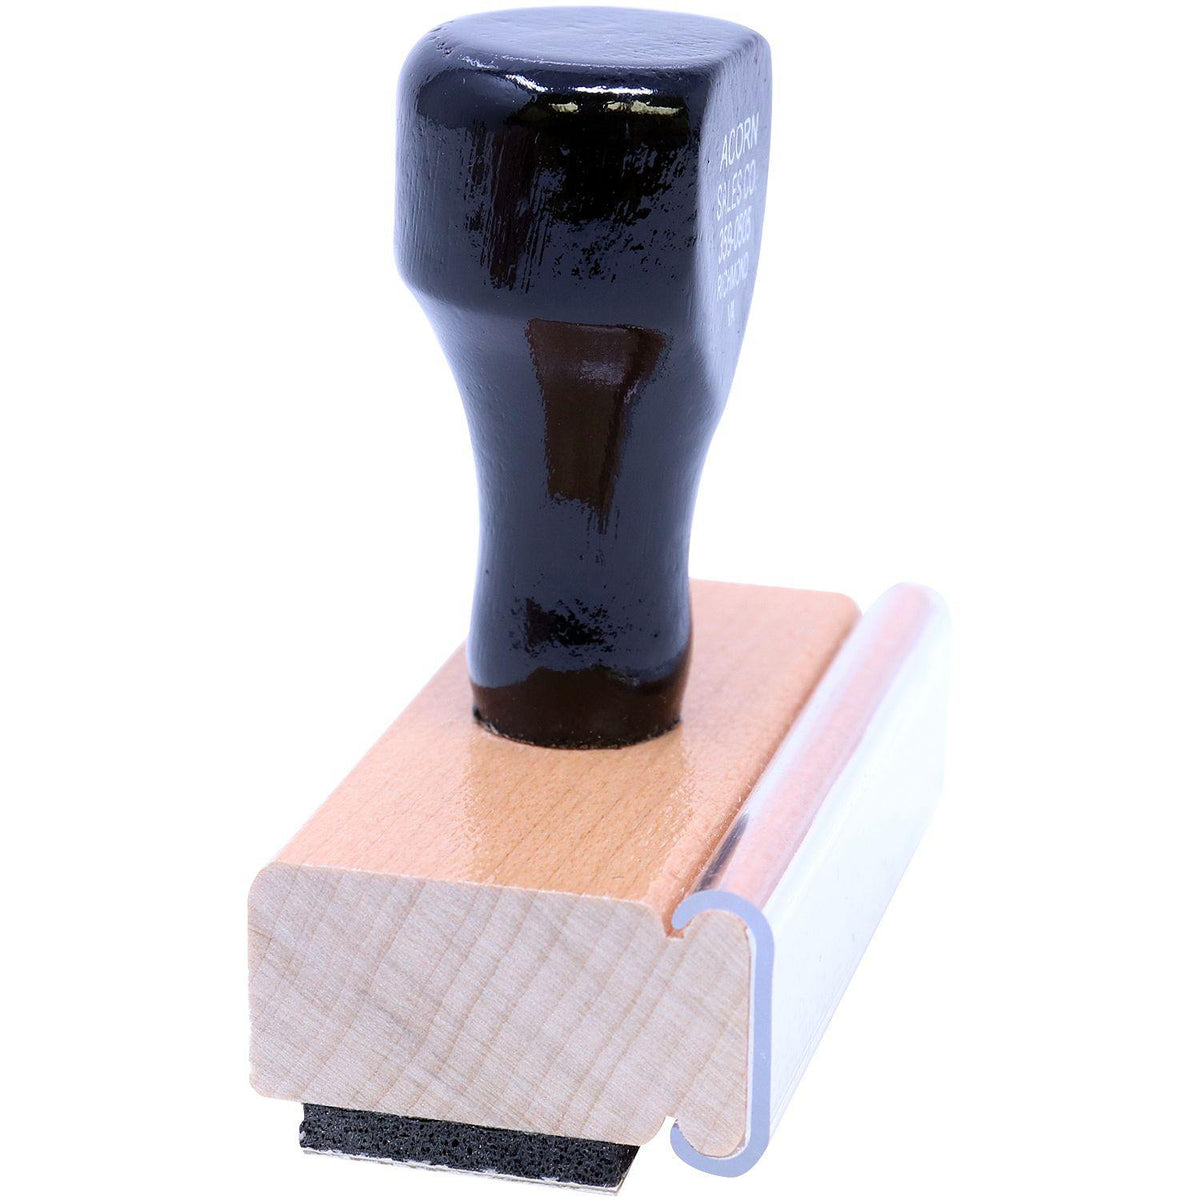 Side View of Escrow Account Rubber Stamp at an Angle